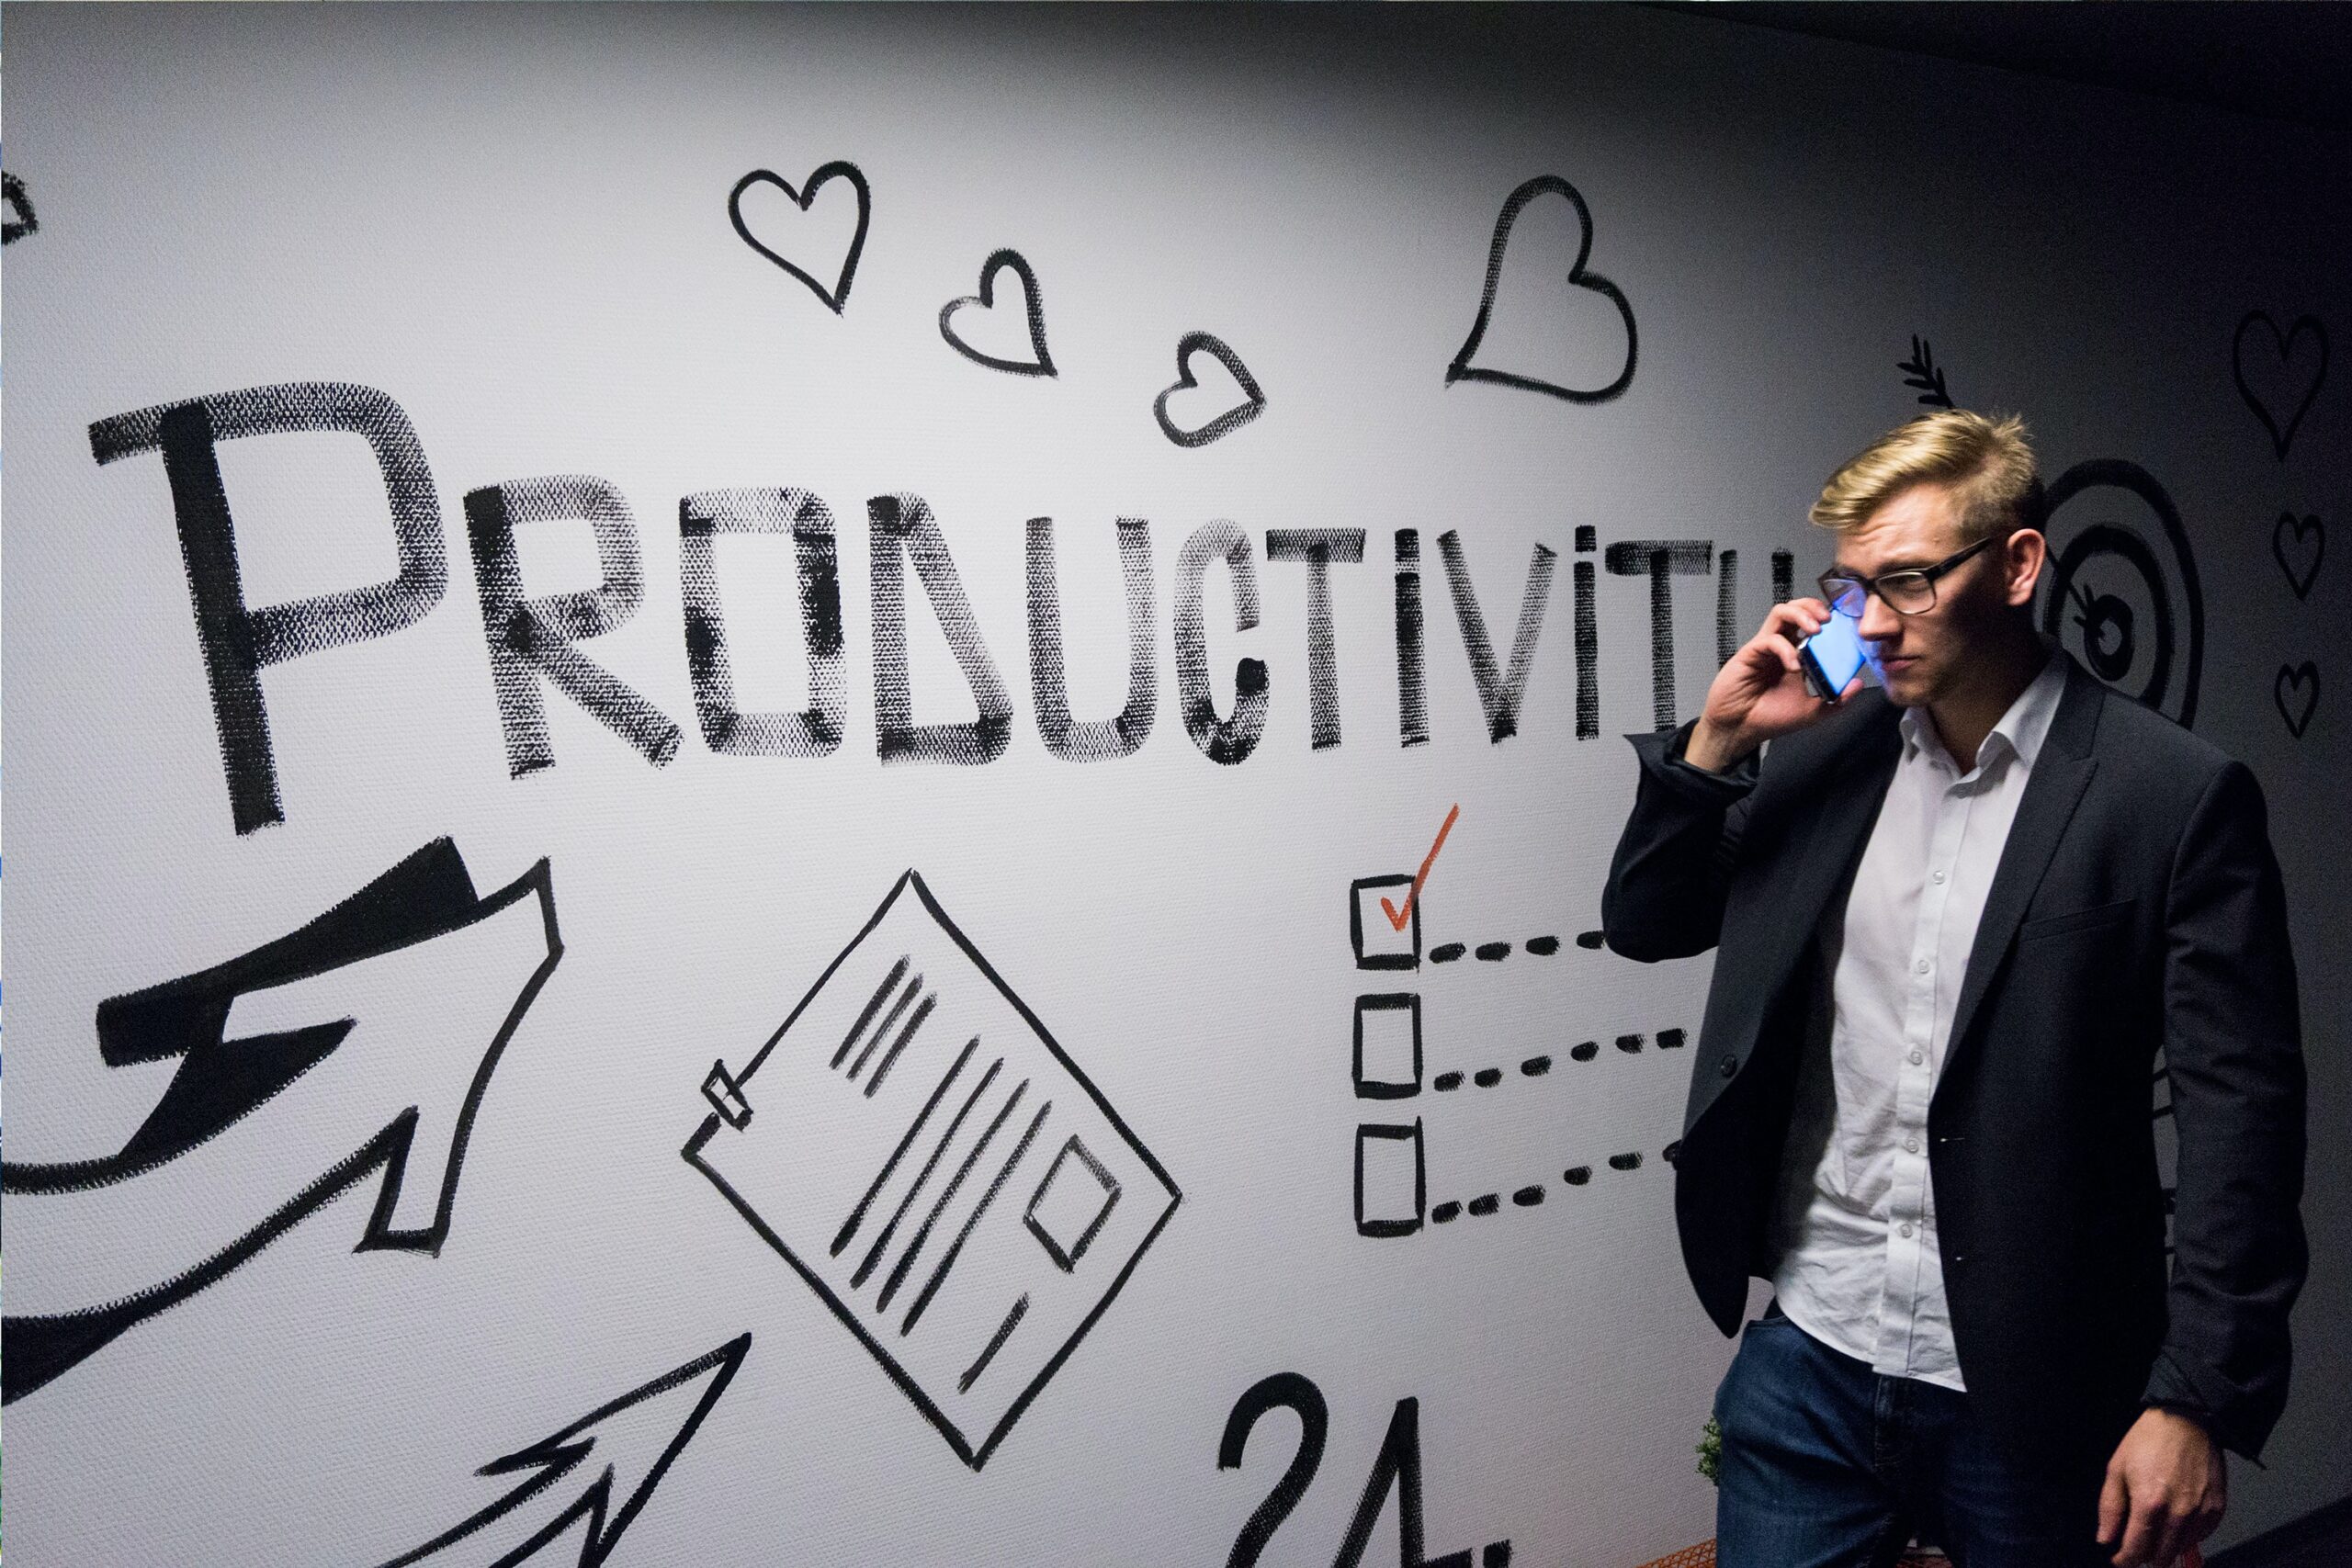 image of man on a cellphone walking in front of a whiteboard with the work "productivity" and other images to represent efficiency